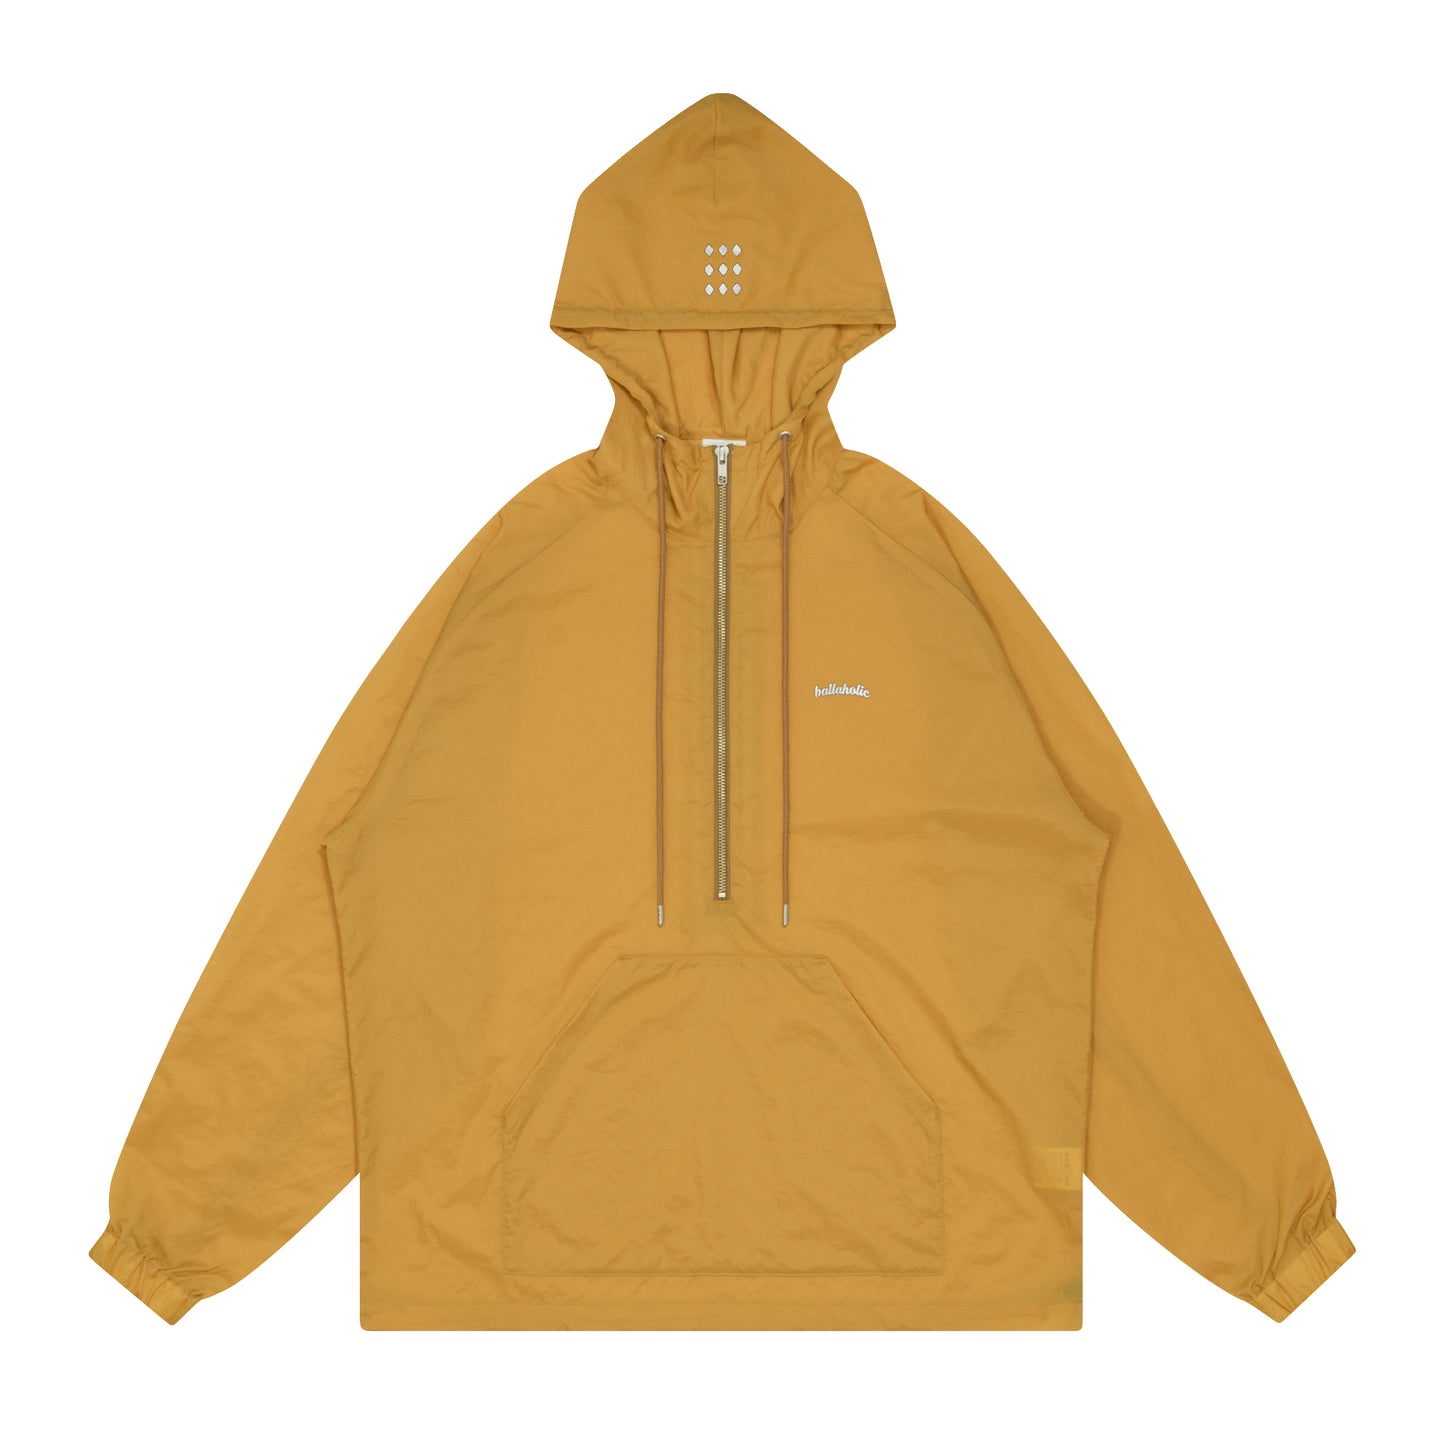 W Face Half Zip Pull Over (soul yellow)